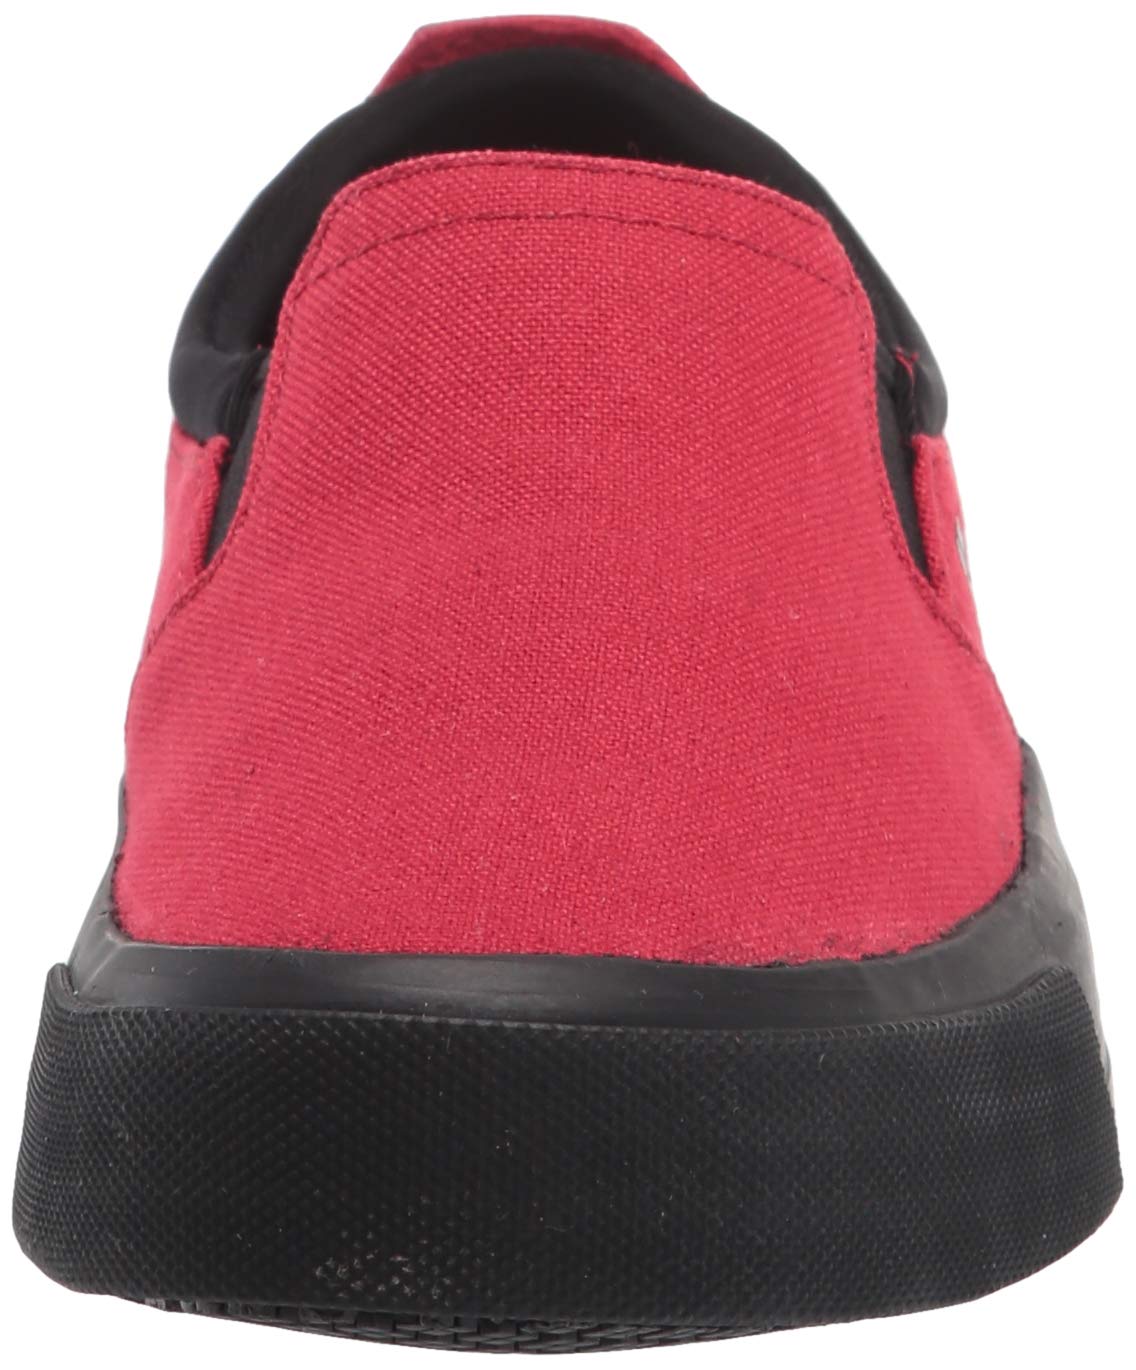 Shoes for Crews Ollie II, Mens, Women's, Unisex Slip Resistant Work Shoe Sneaker, Black Leather or Red Canvas